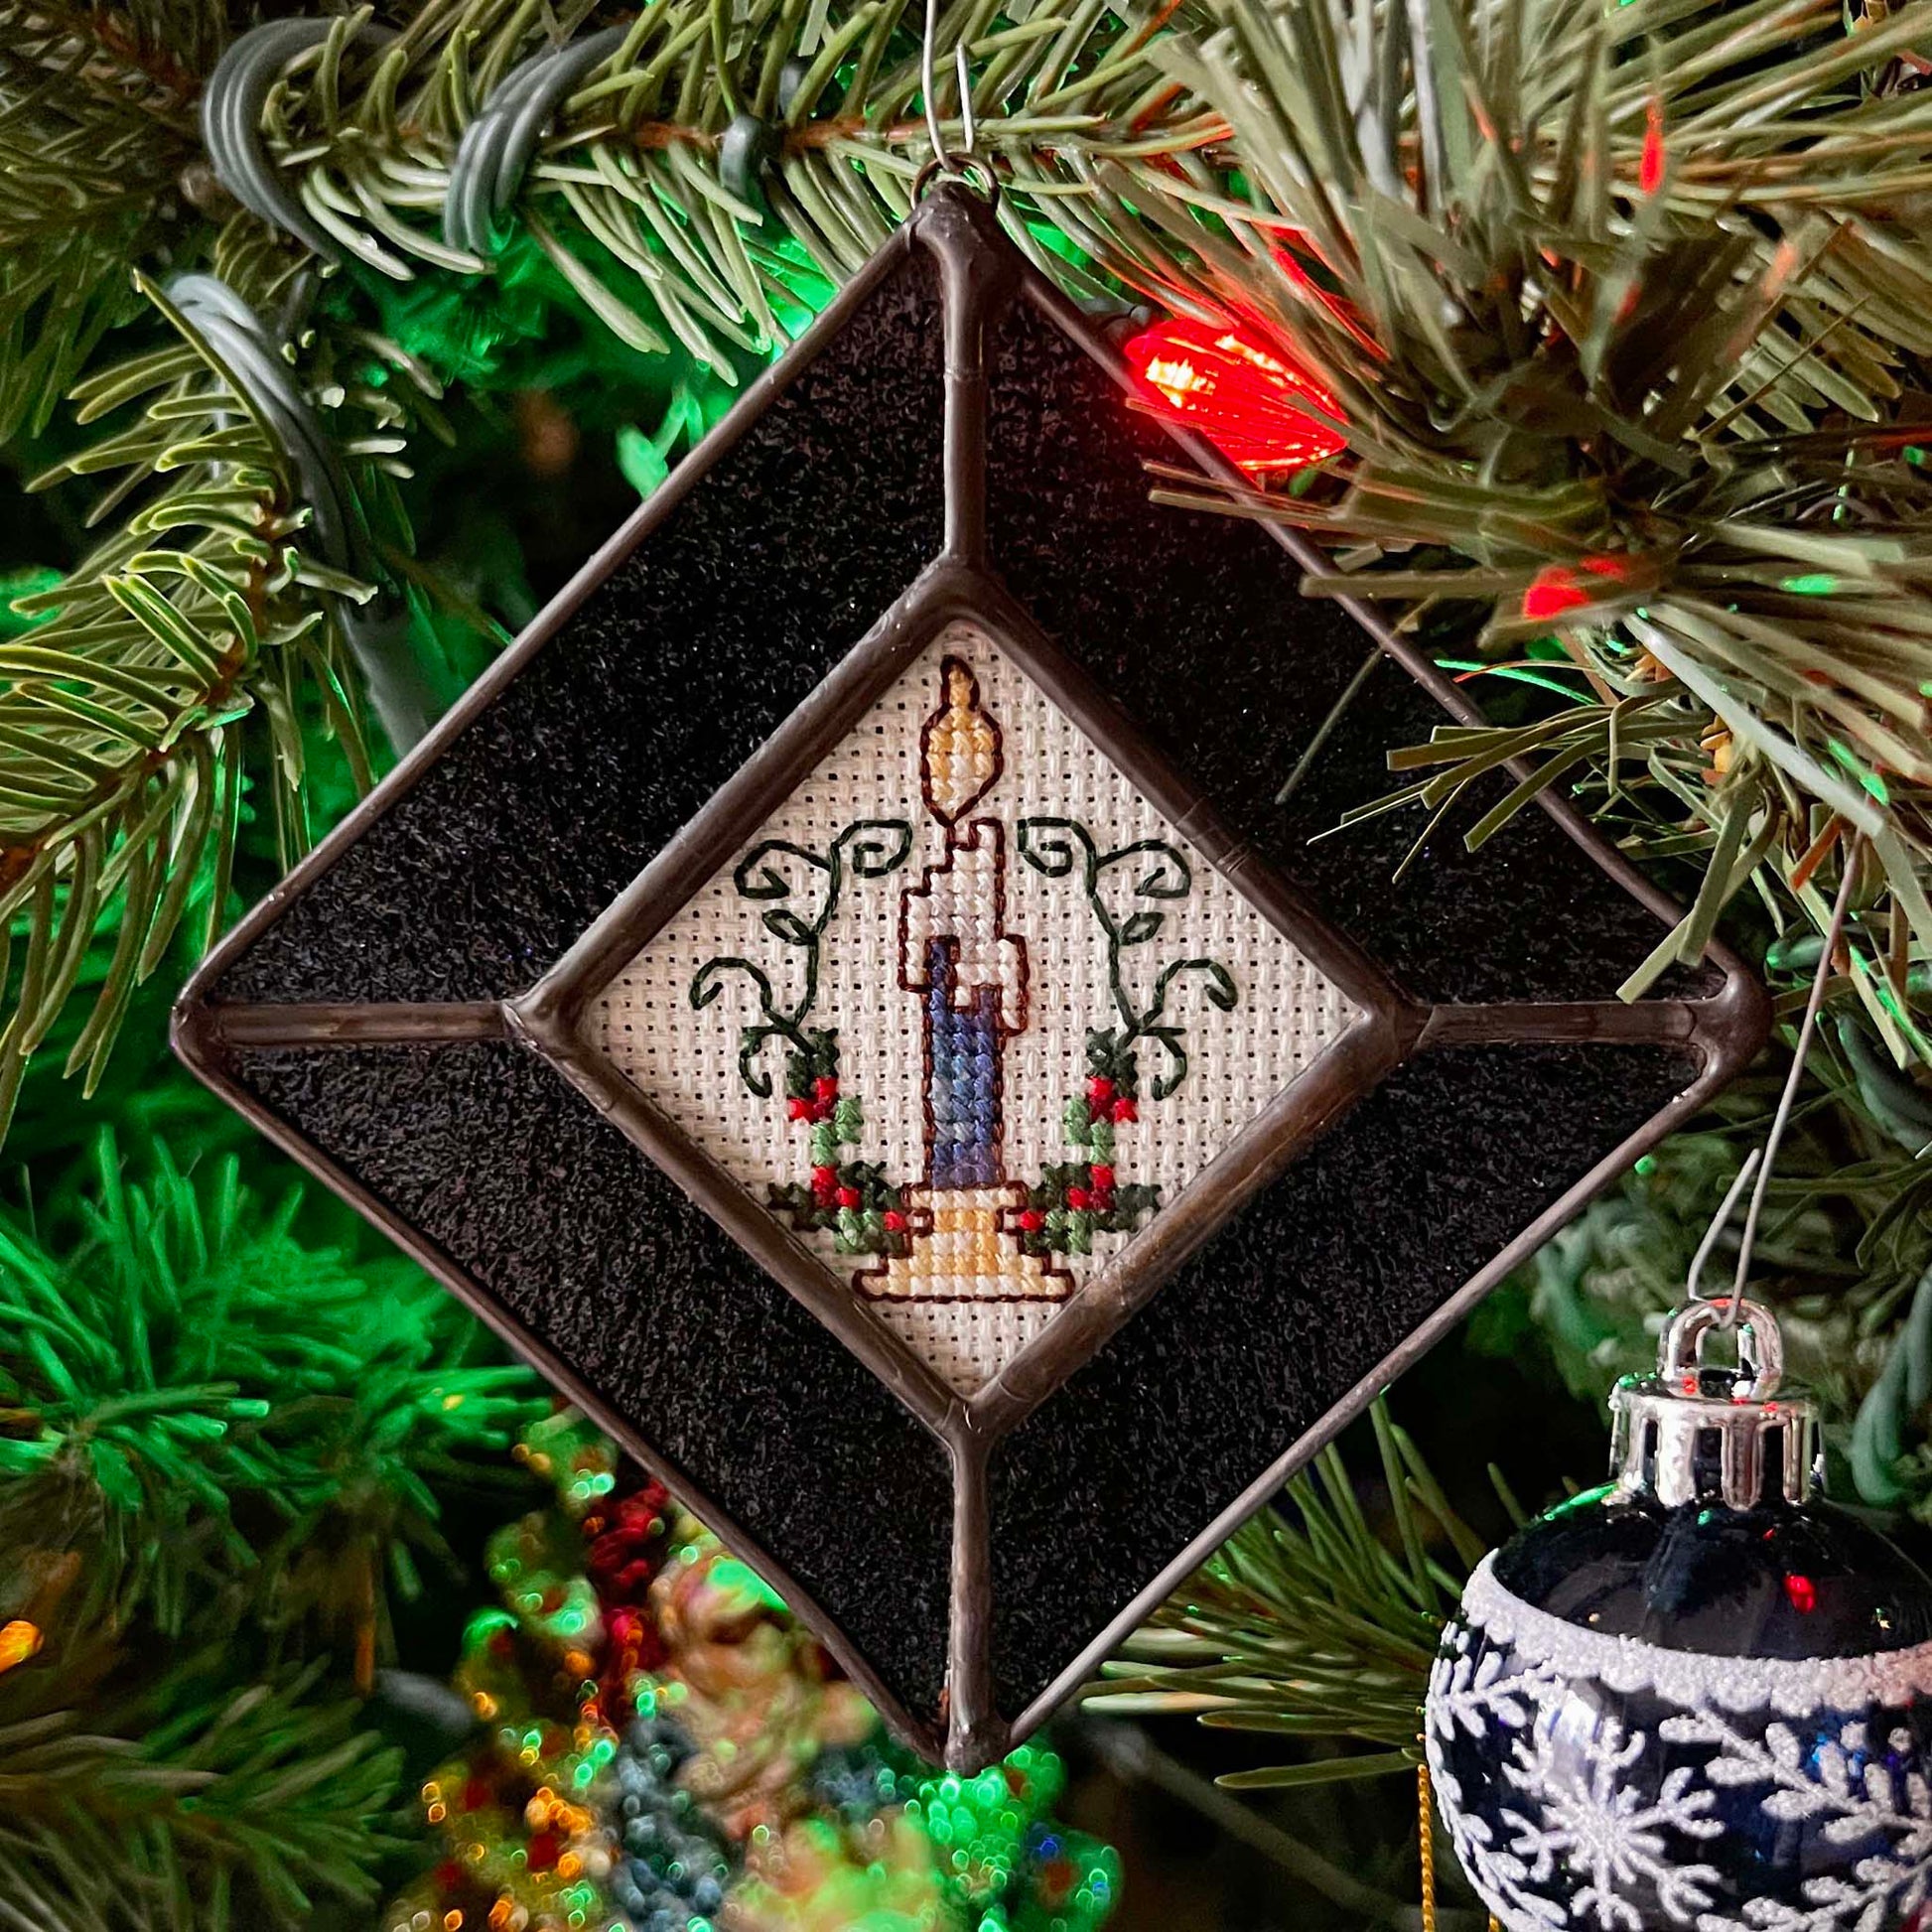 Blue Candle Cross-stitch Ornament with Dark Blue stained glass